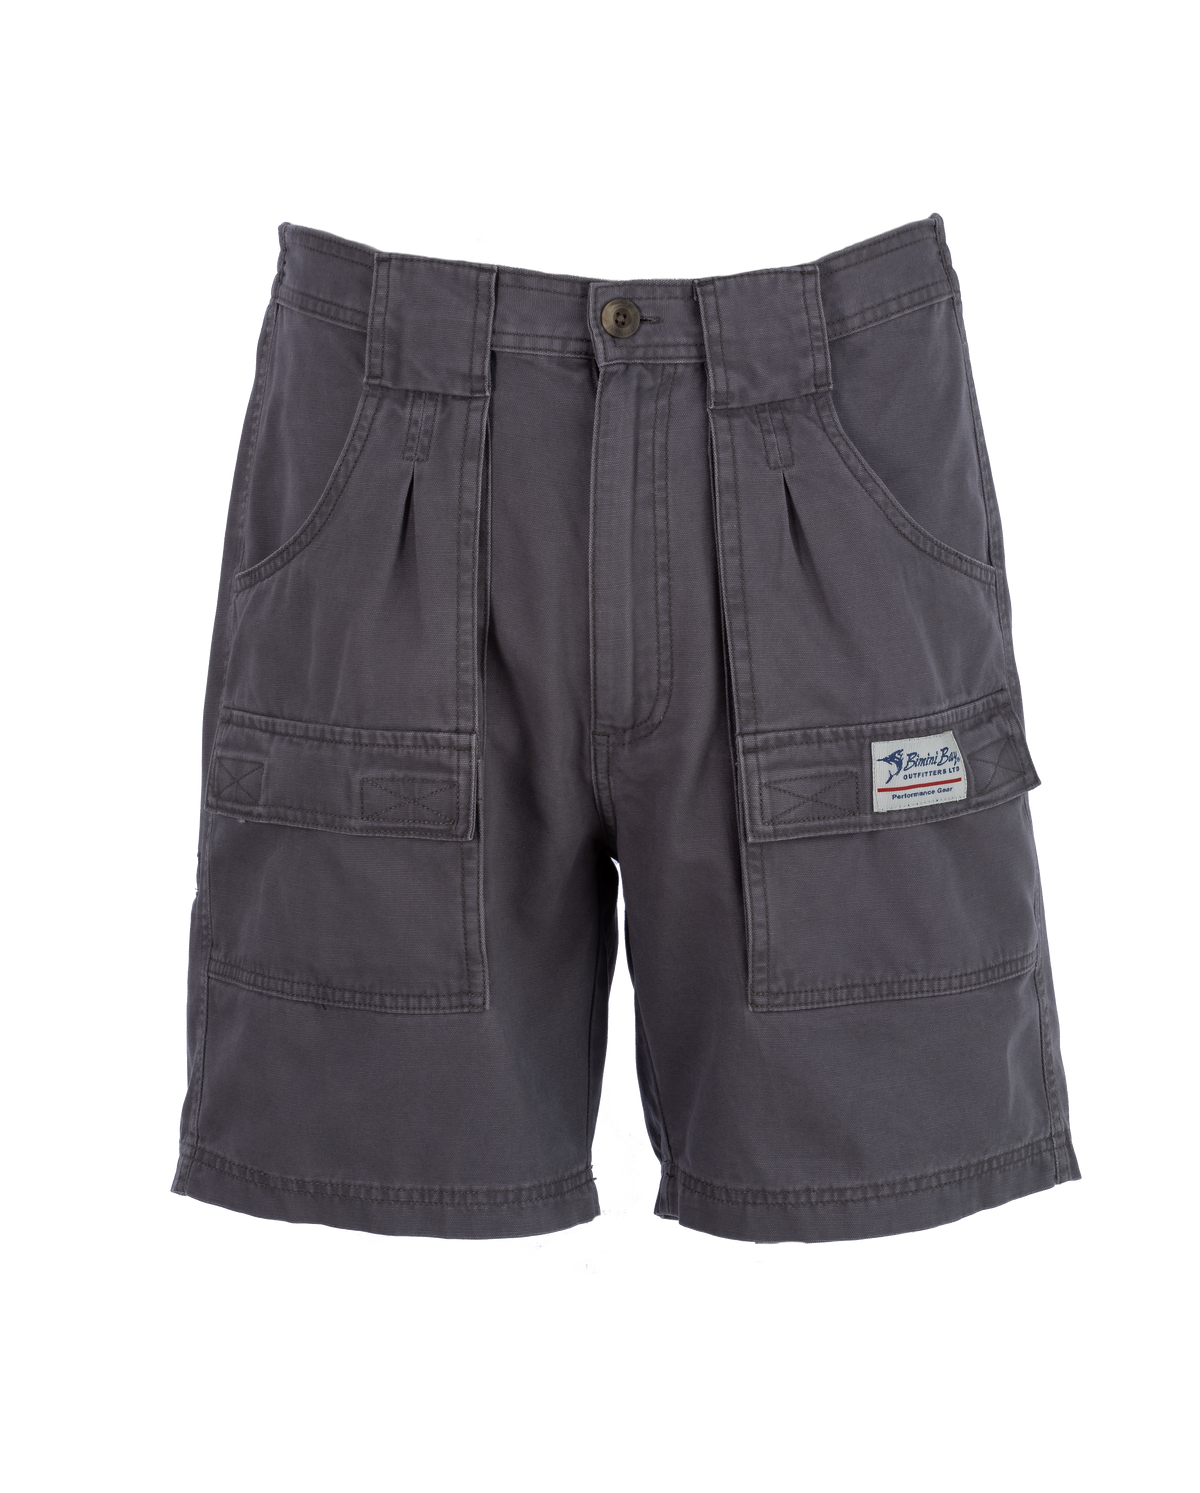 Bimini Bay Outfitters Men&#39;s Outback Hiker Cotton Cargo Short